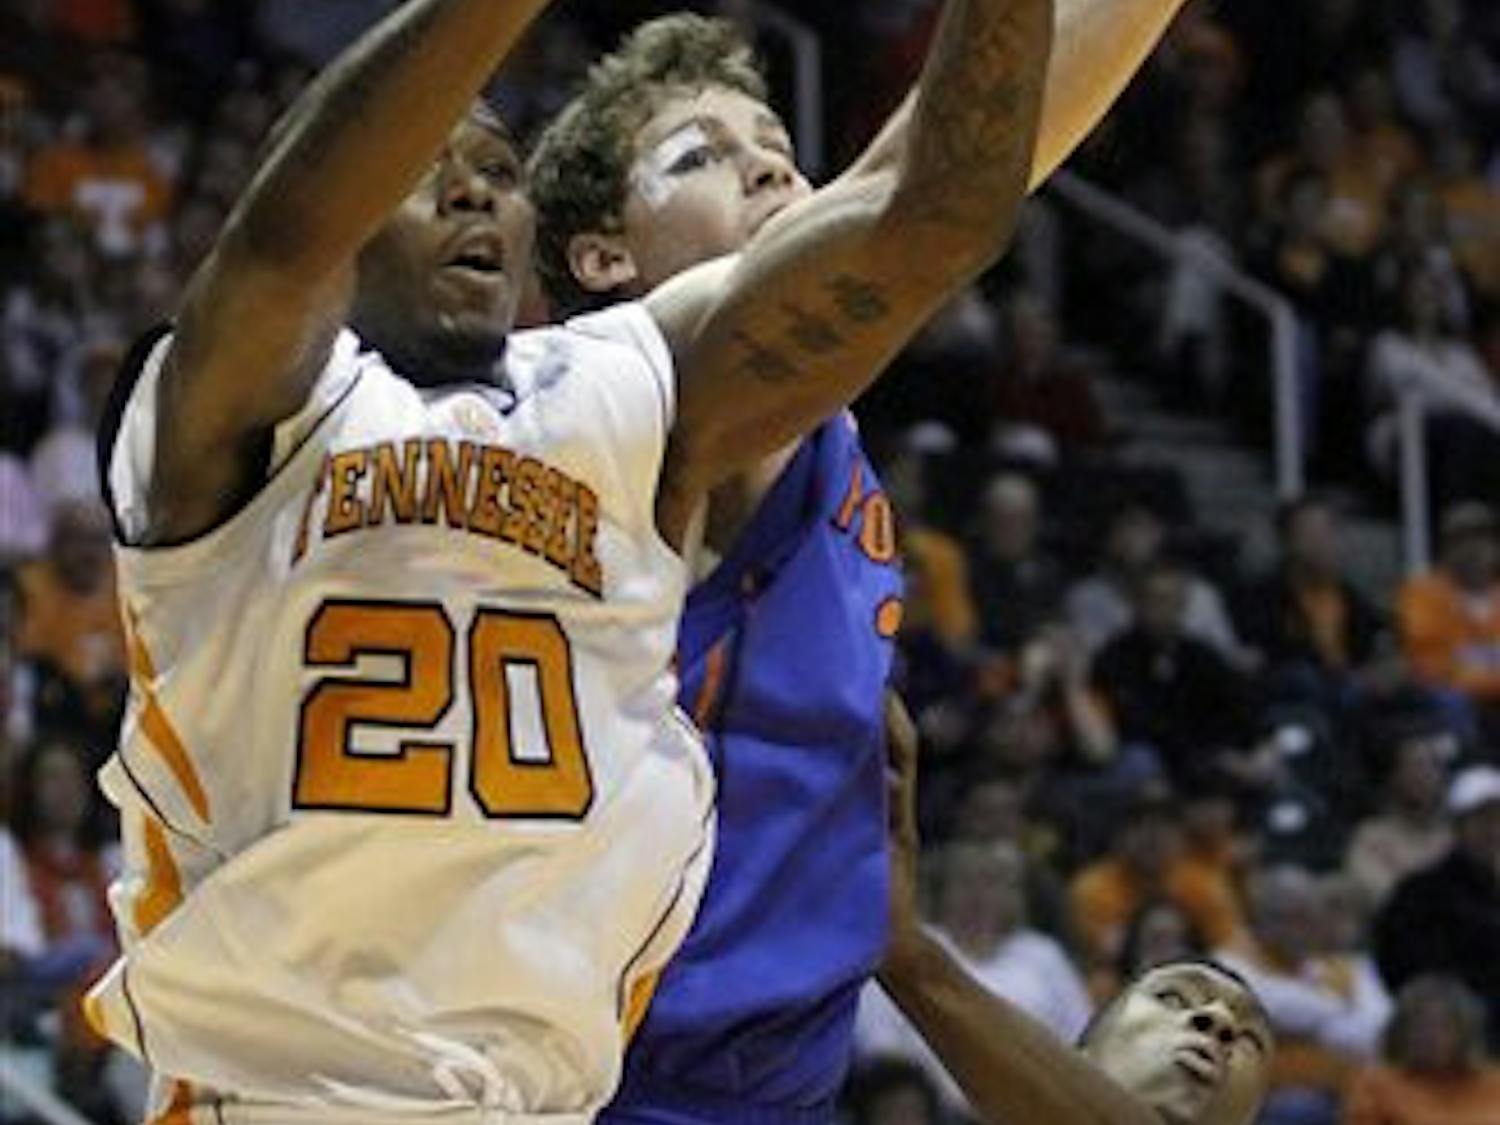 Tennessee's Kenny Hall (20) grabs a rebound away from Florida's Erik Murphy in the first half of an NCAA college basketball game on Saturday, Jan. 7, 2012, in Knoxville, Tenn. Tennessee won 67-56. (AP Photo/Wade Payne)